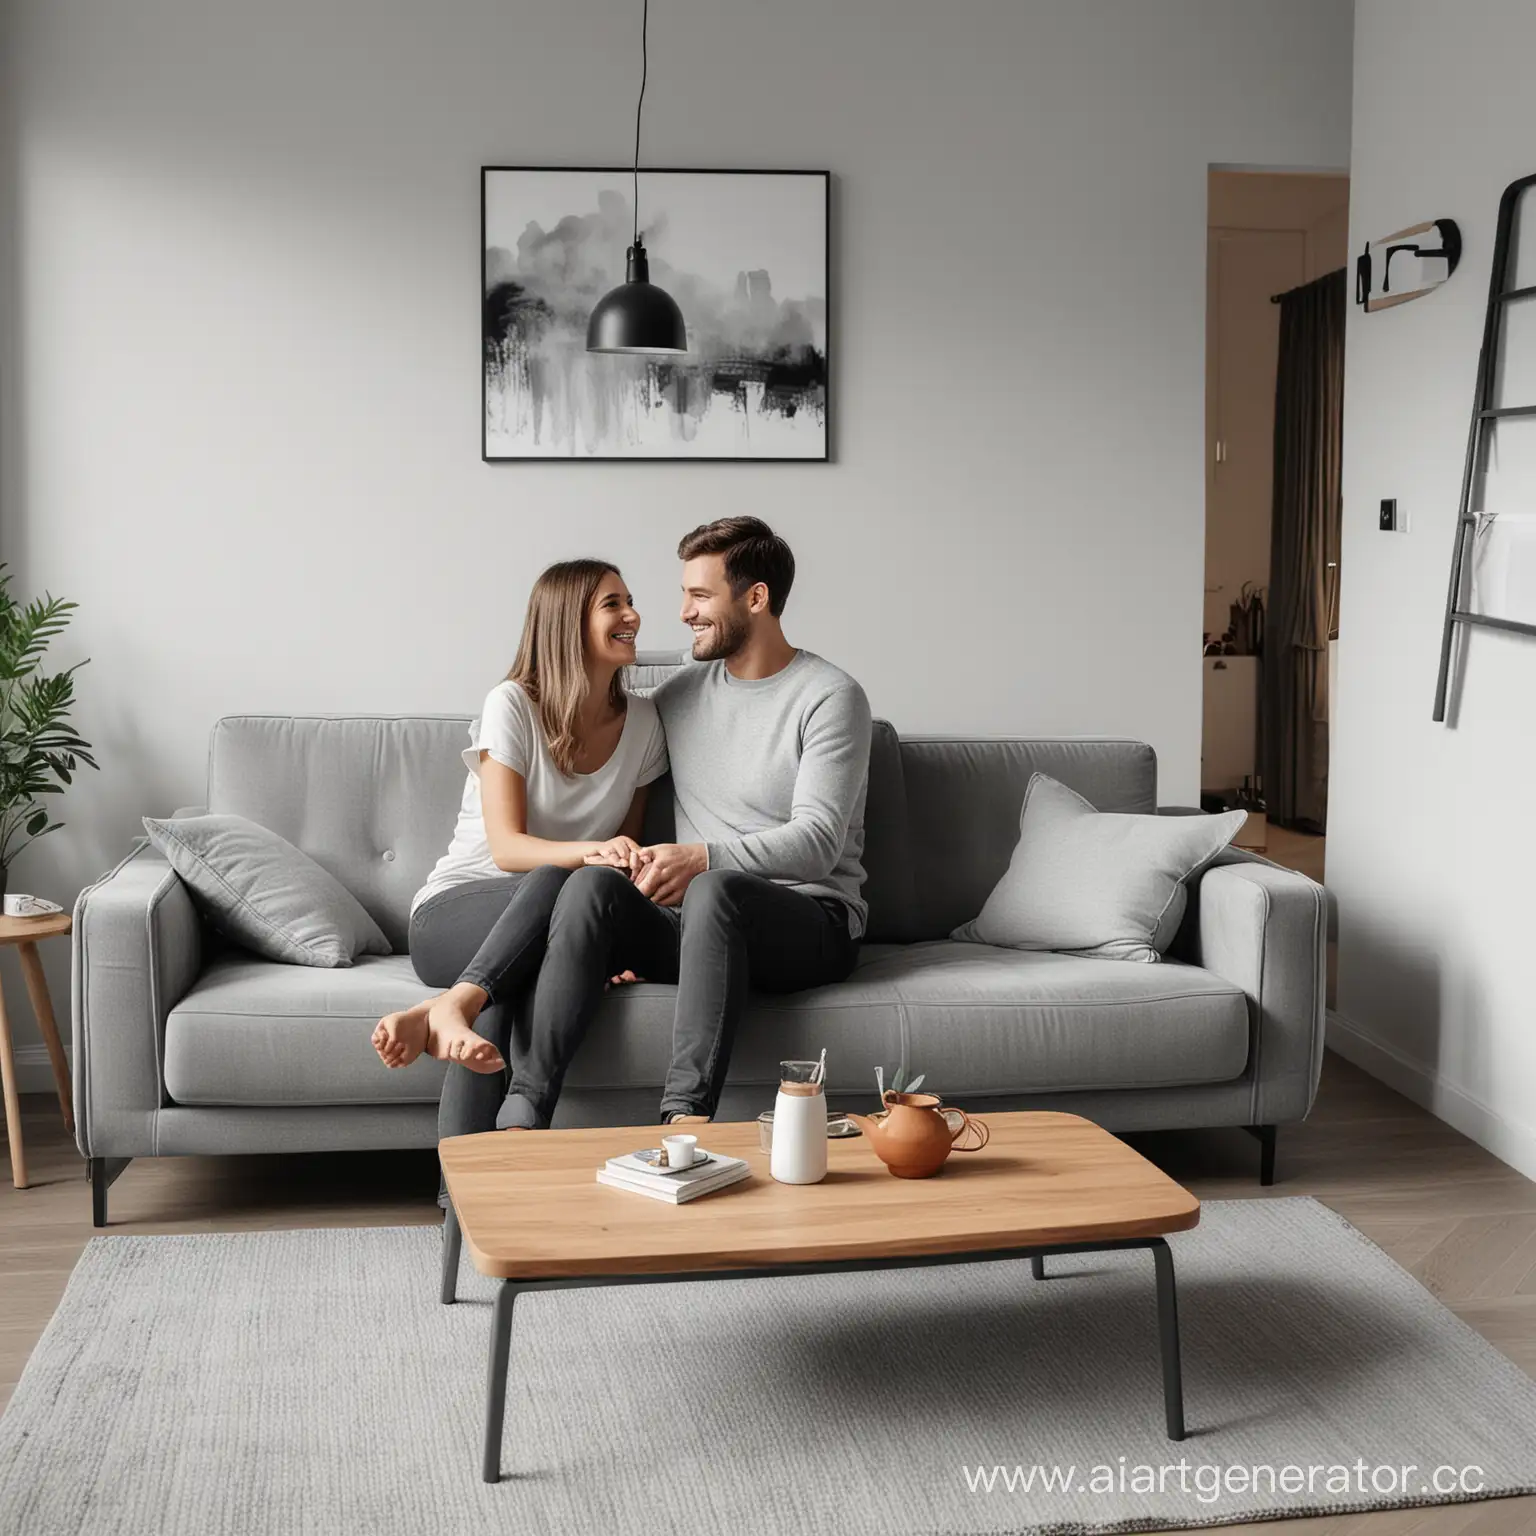 Cozy-GrayToned-Apartment-with-Content-Couple-Relaxing-on-Couch